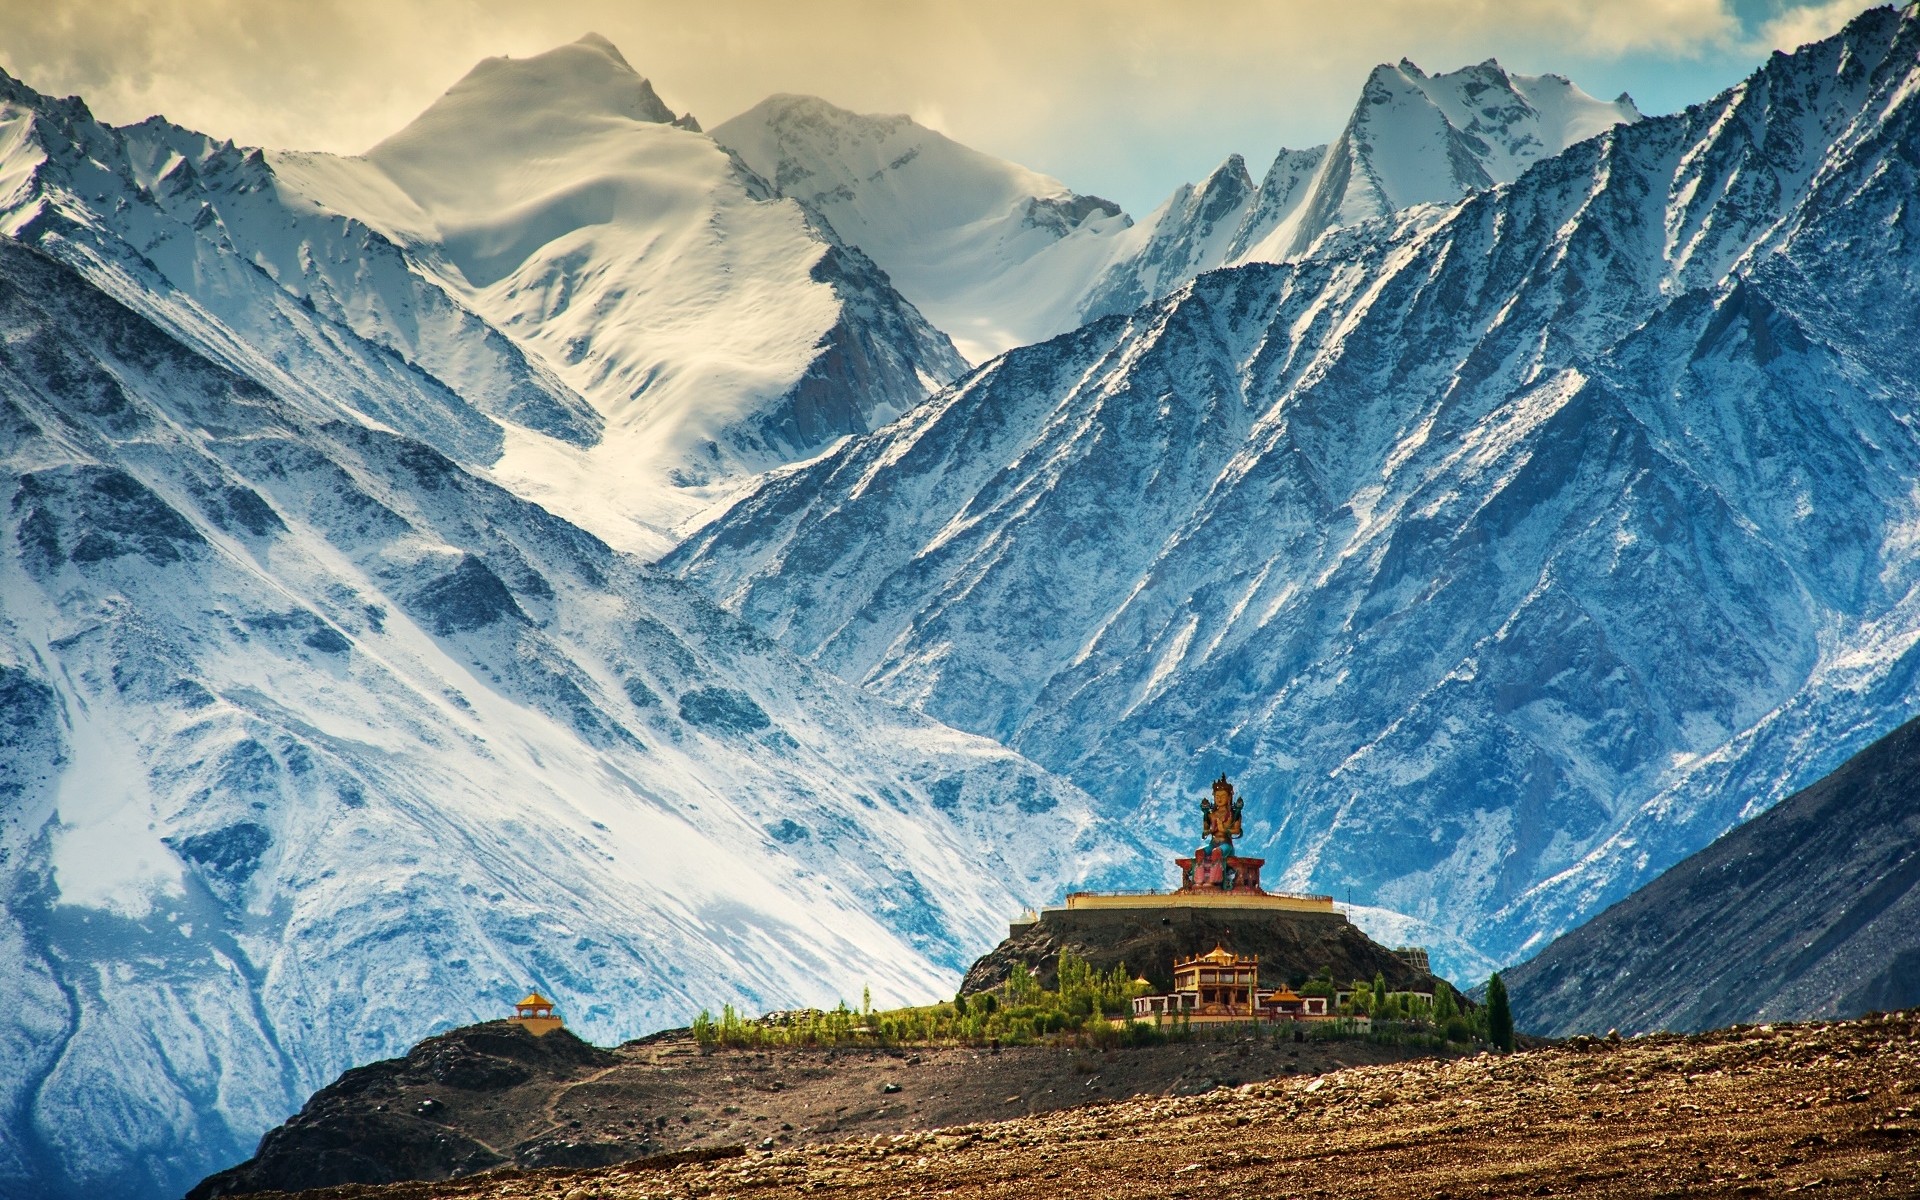 Buddha, Nature, Landscape, Architecture, Trees, Building, Himalayas, India, Monastery, Buddhism, Mountains, Hills, Snowy mountain, Sculpture, Rock, Stones Wallpaper